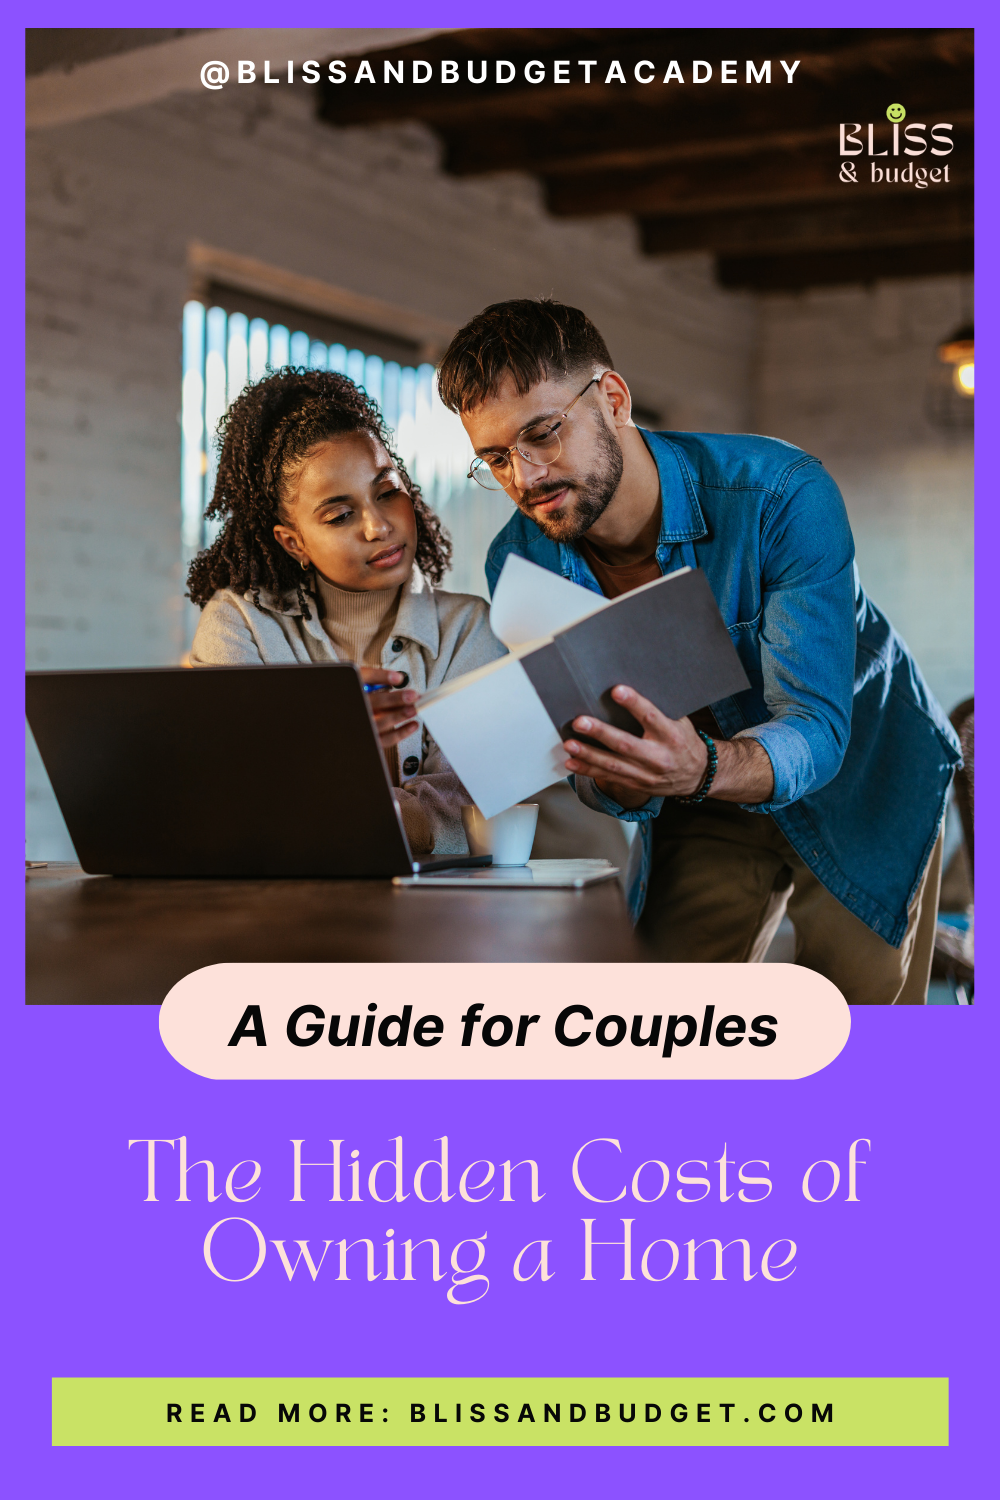 The Hidden Costs of Owning a Home: A Guide for Couples